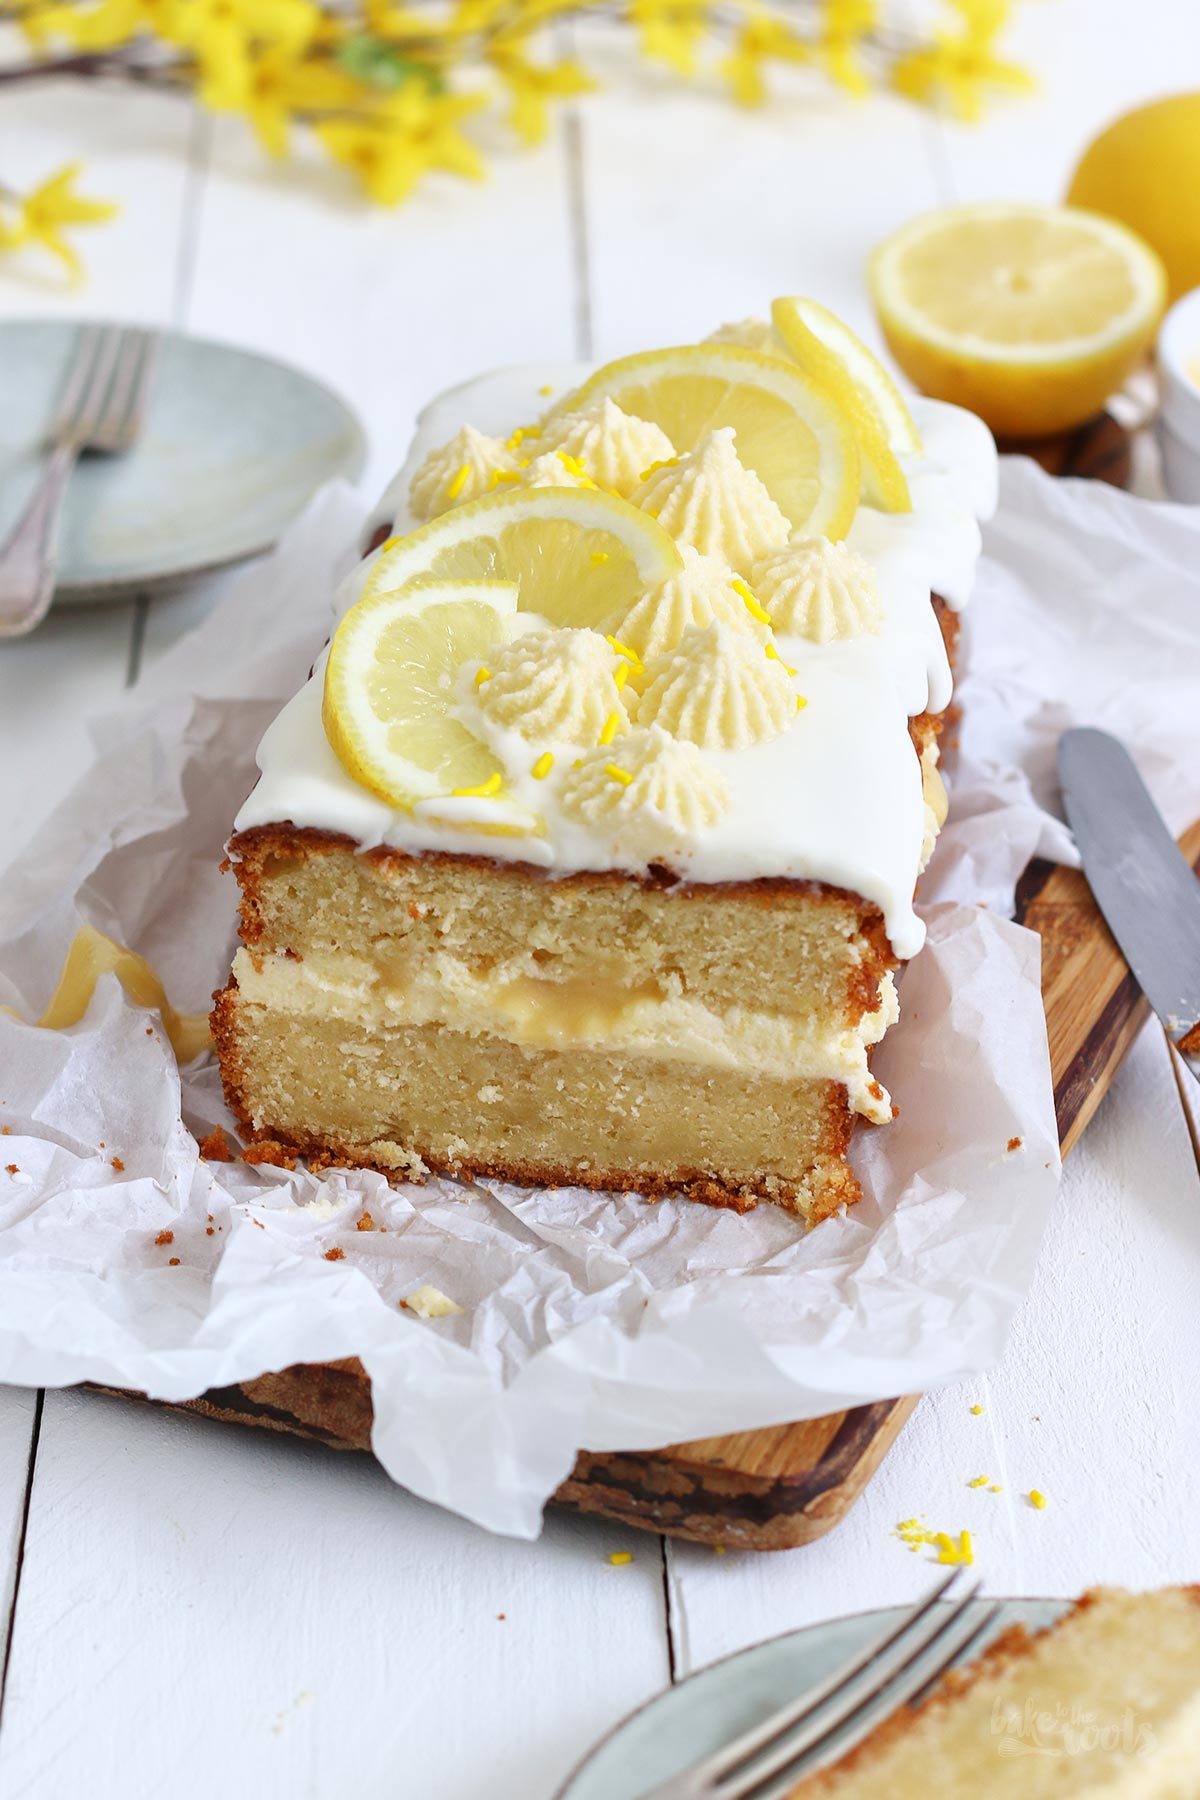 Buttermilk Lemon Pound Cake with Lemon Curd | Bake to the roots